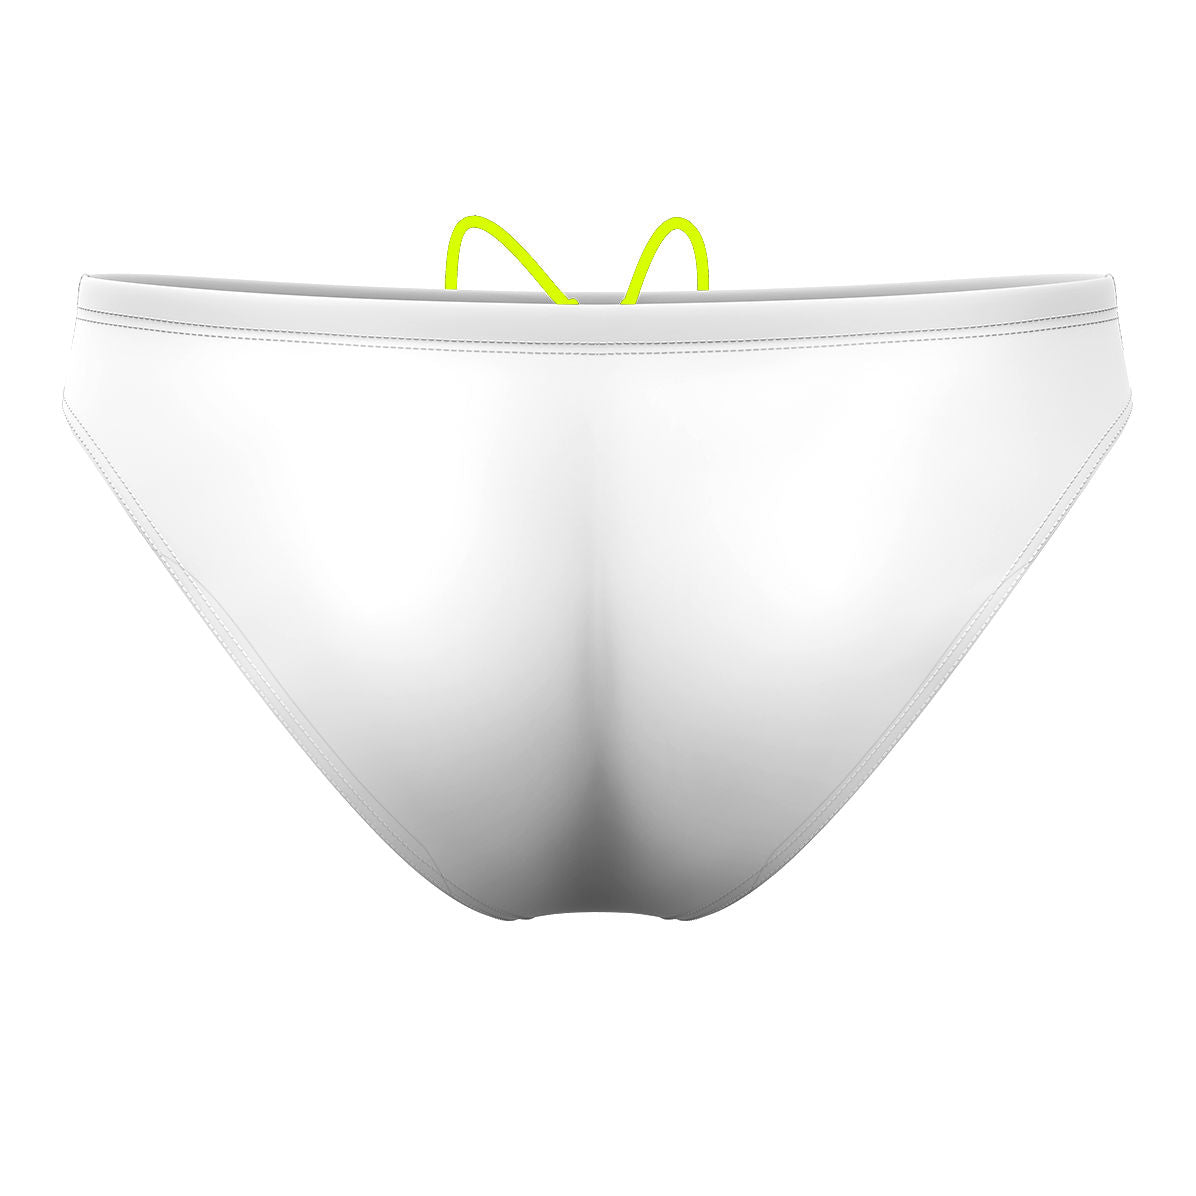 White - Waterpolo Brief Swimsuit